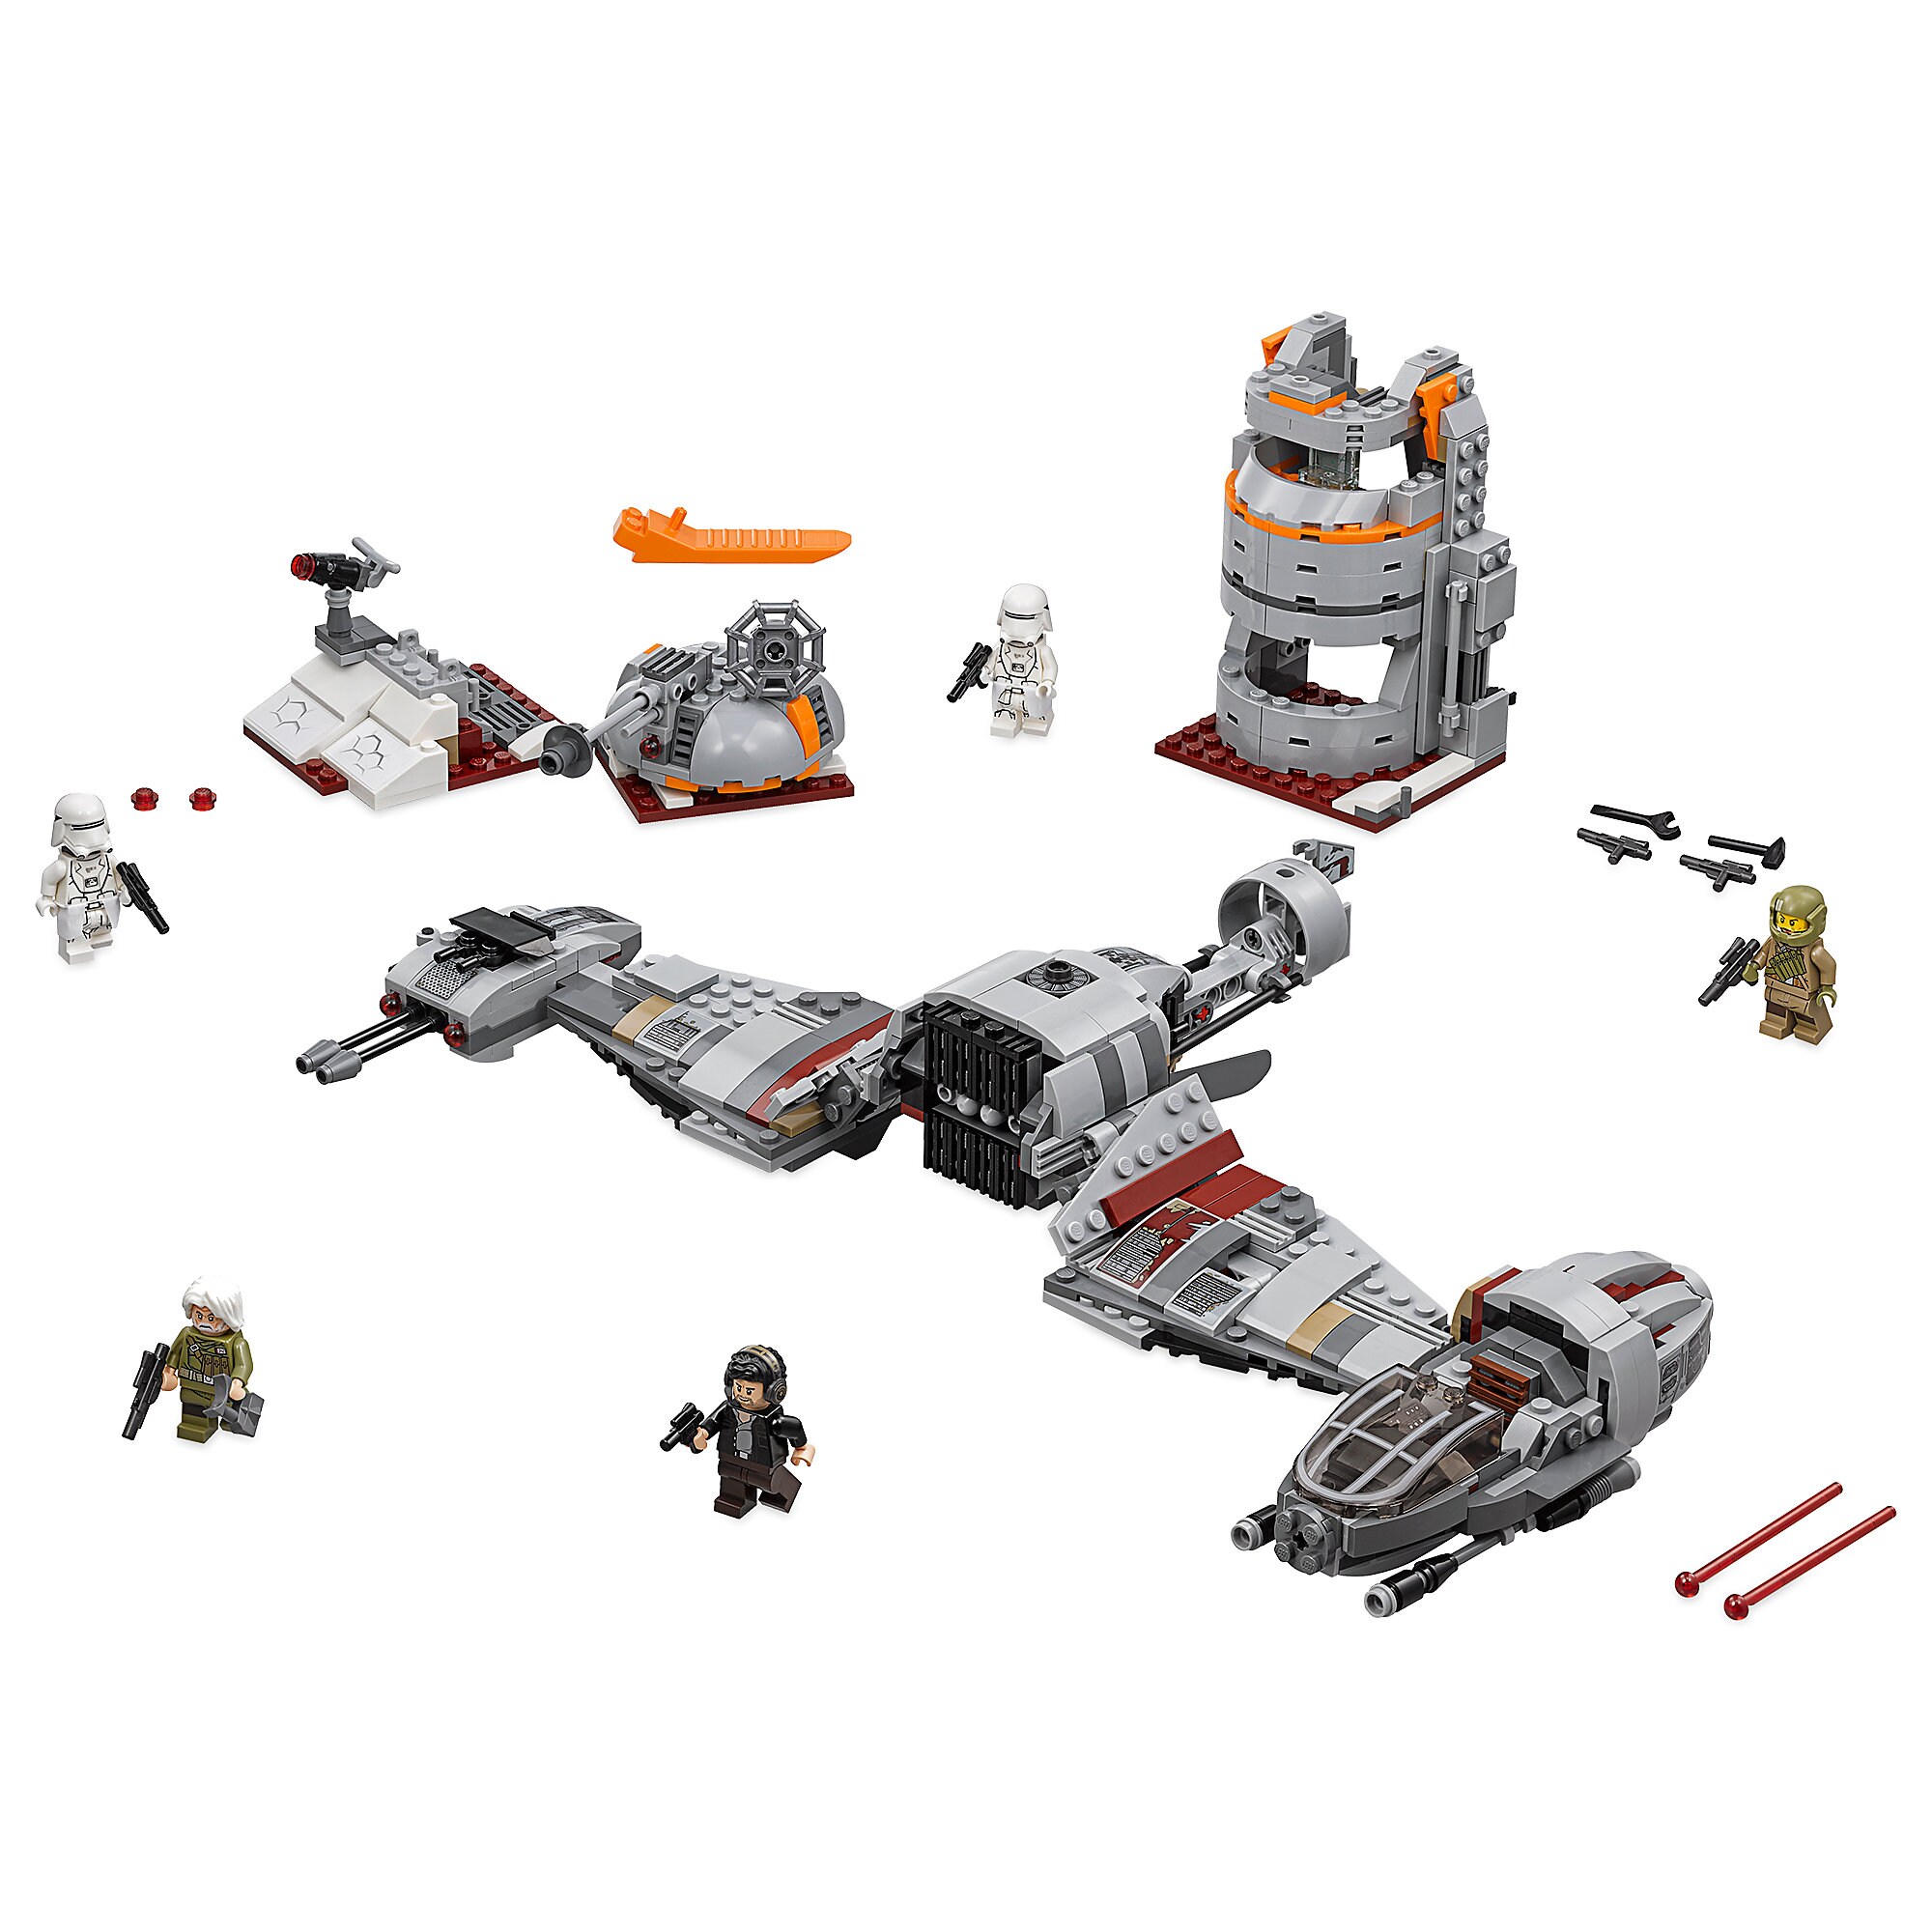 Defense of Crait Playset by LEGO - Star Wars: The Last Jedi